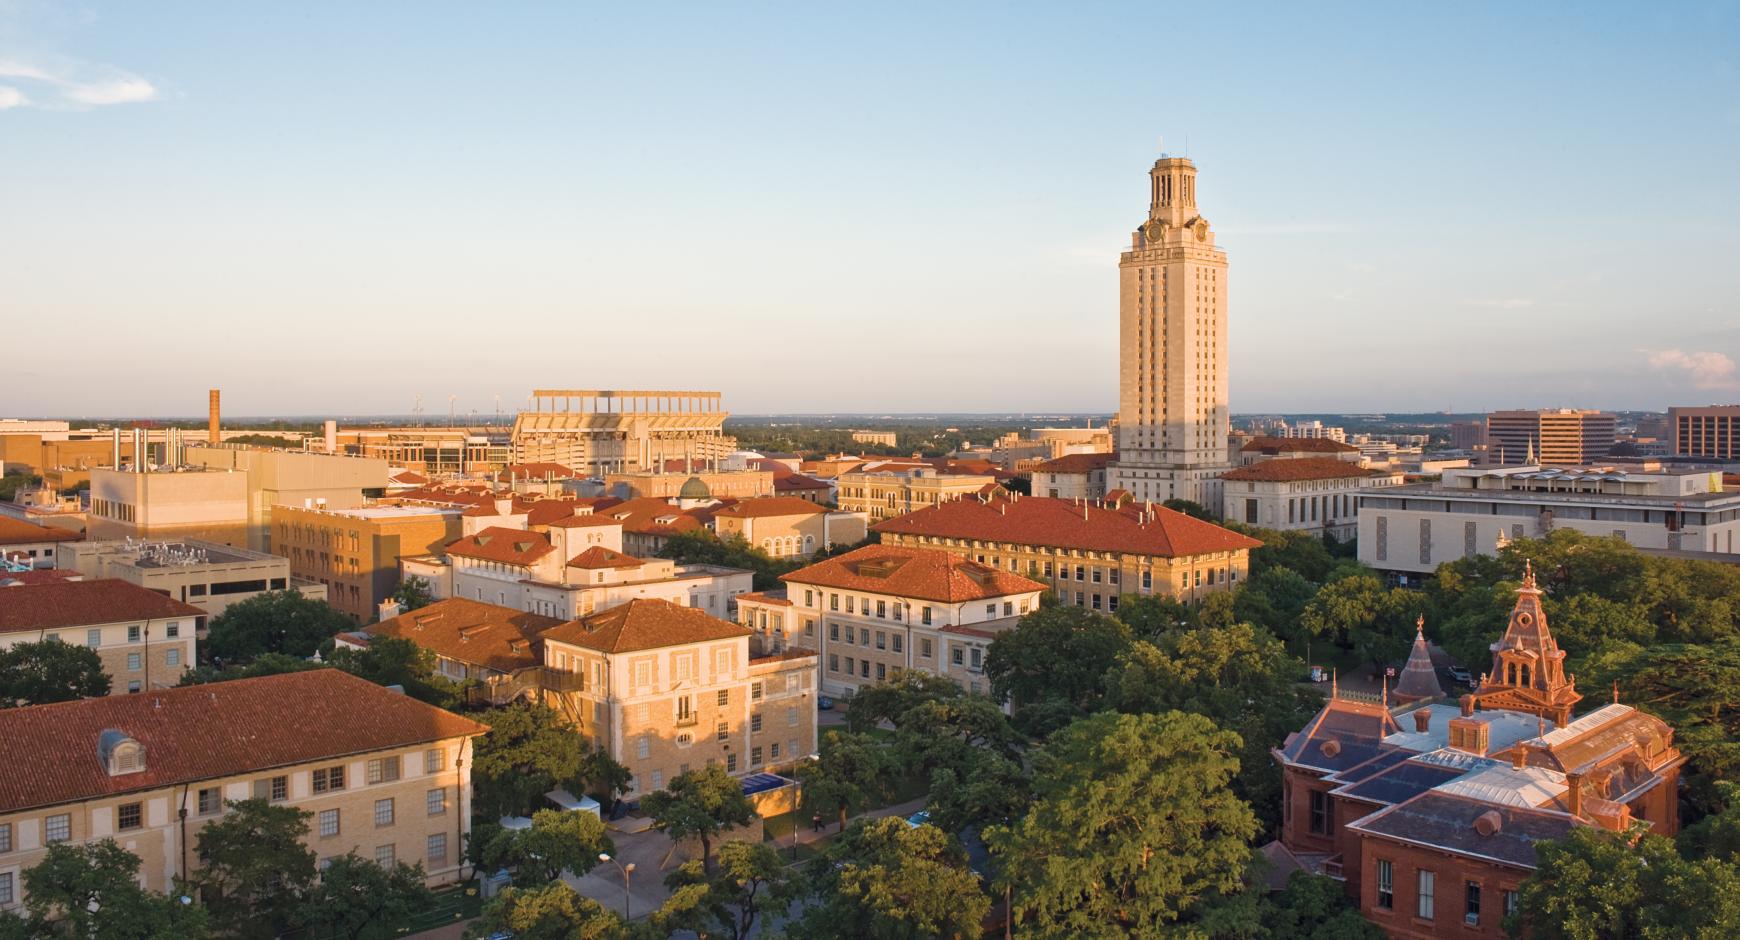 Overview. The University of Texas